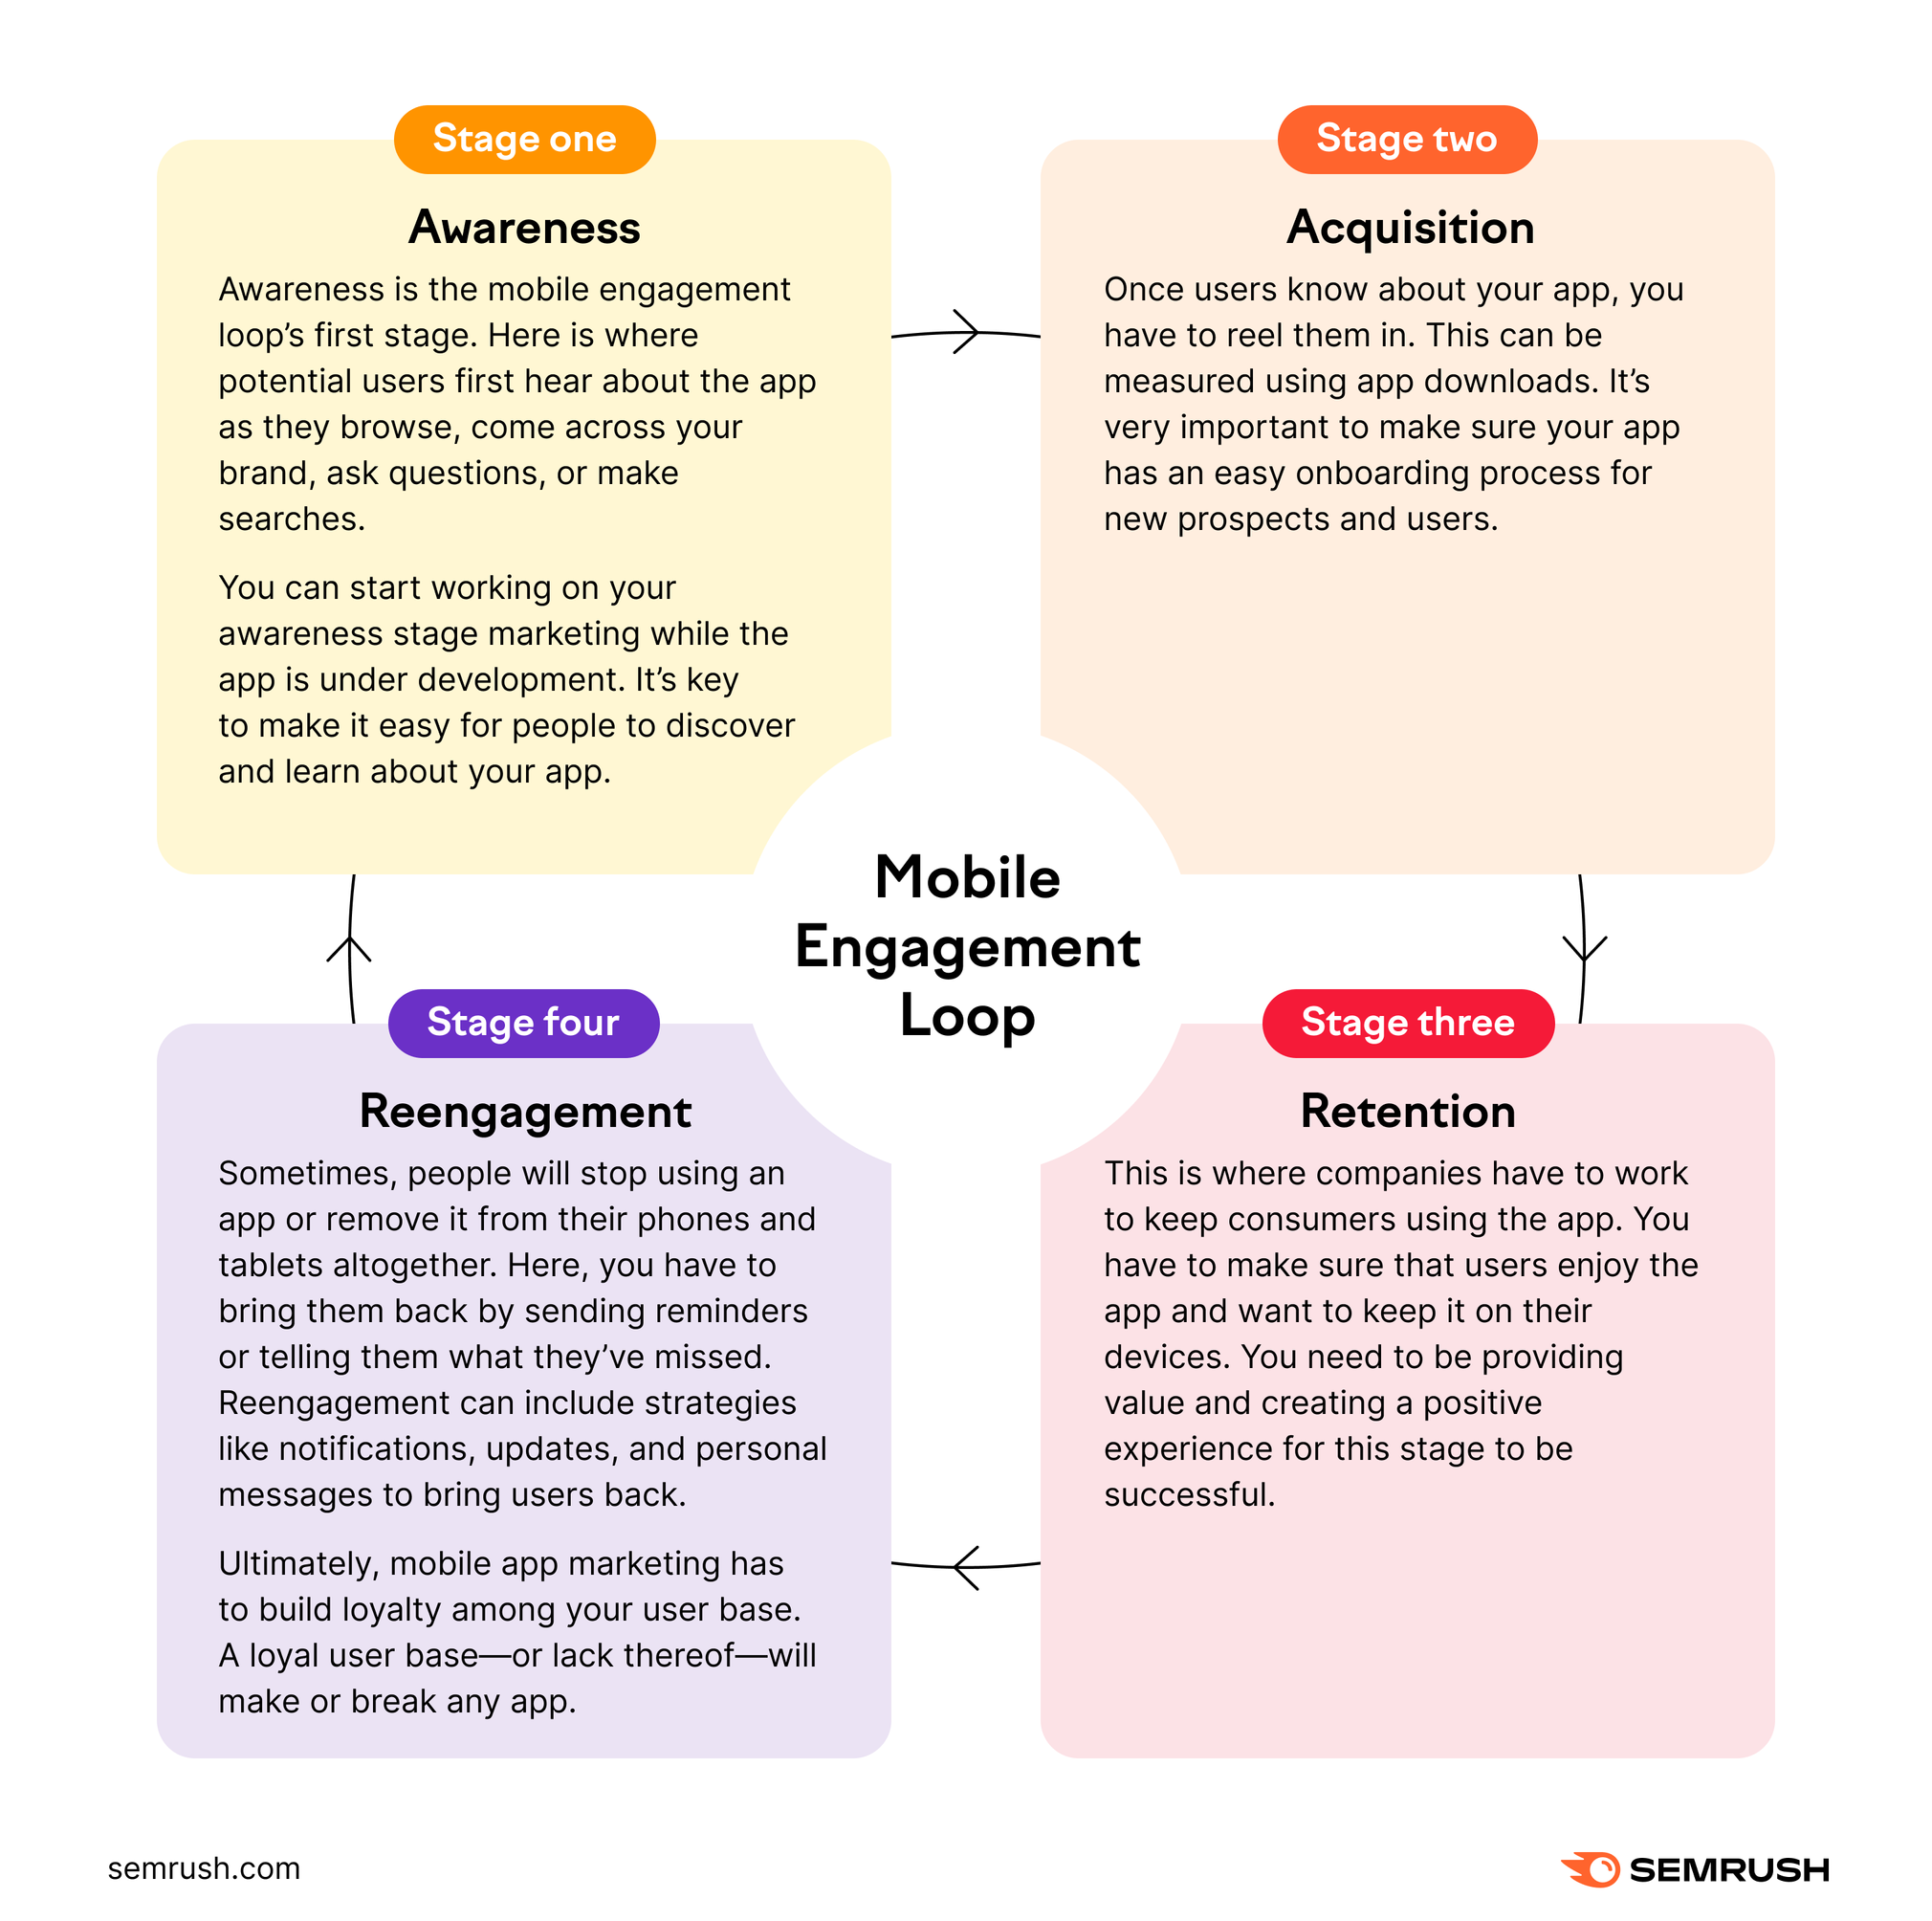 How to market an app with the mobile engagement loop